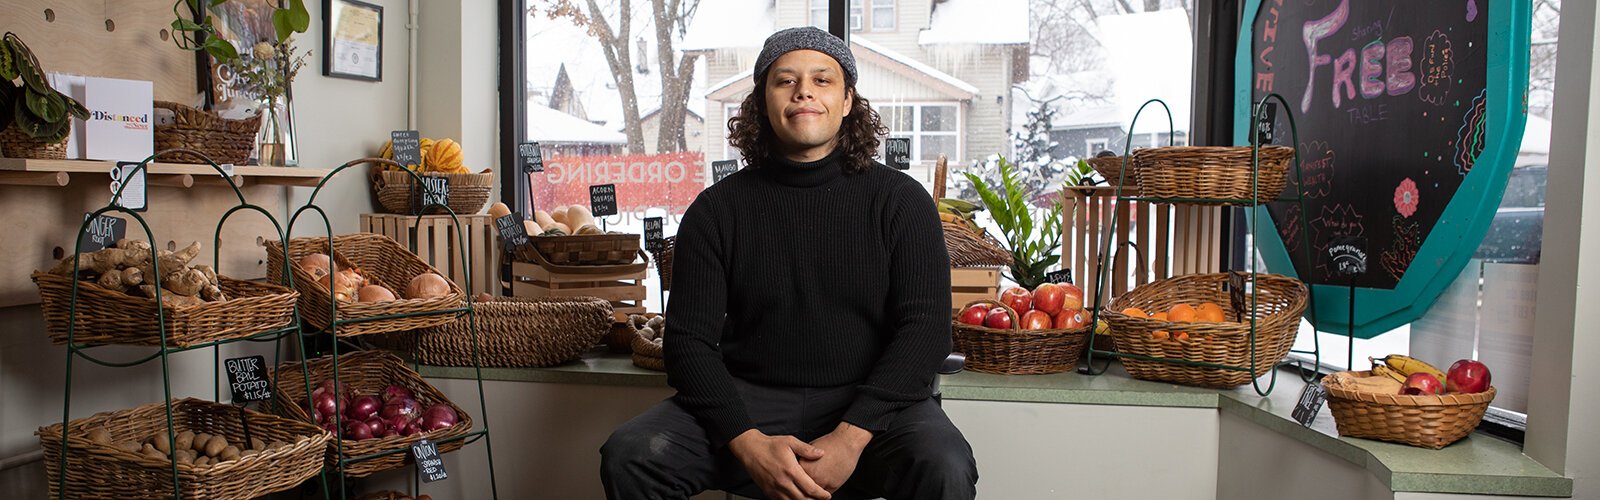 Anishinaabe chef and entrepreneur Camren Stott at South East market in Grand Rapids.